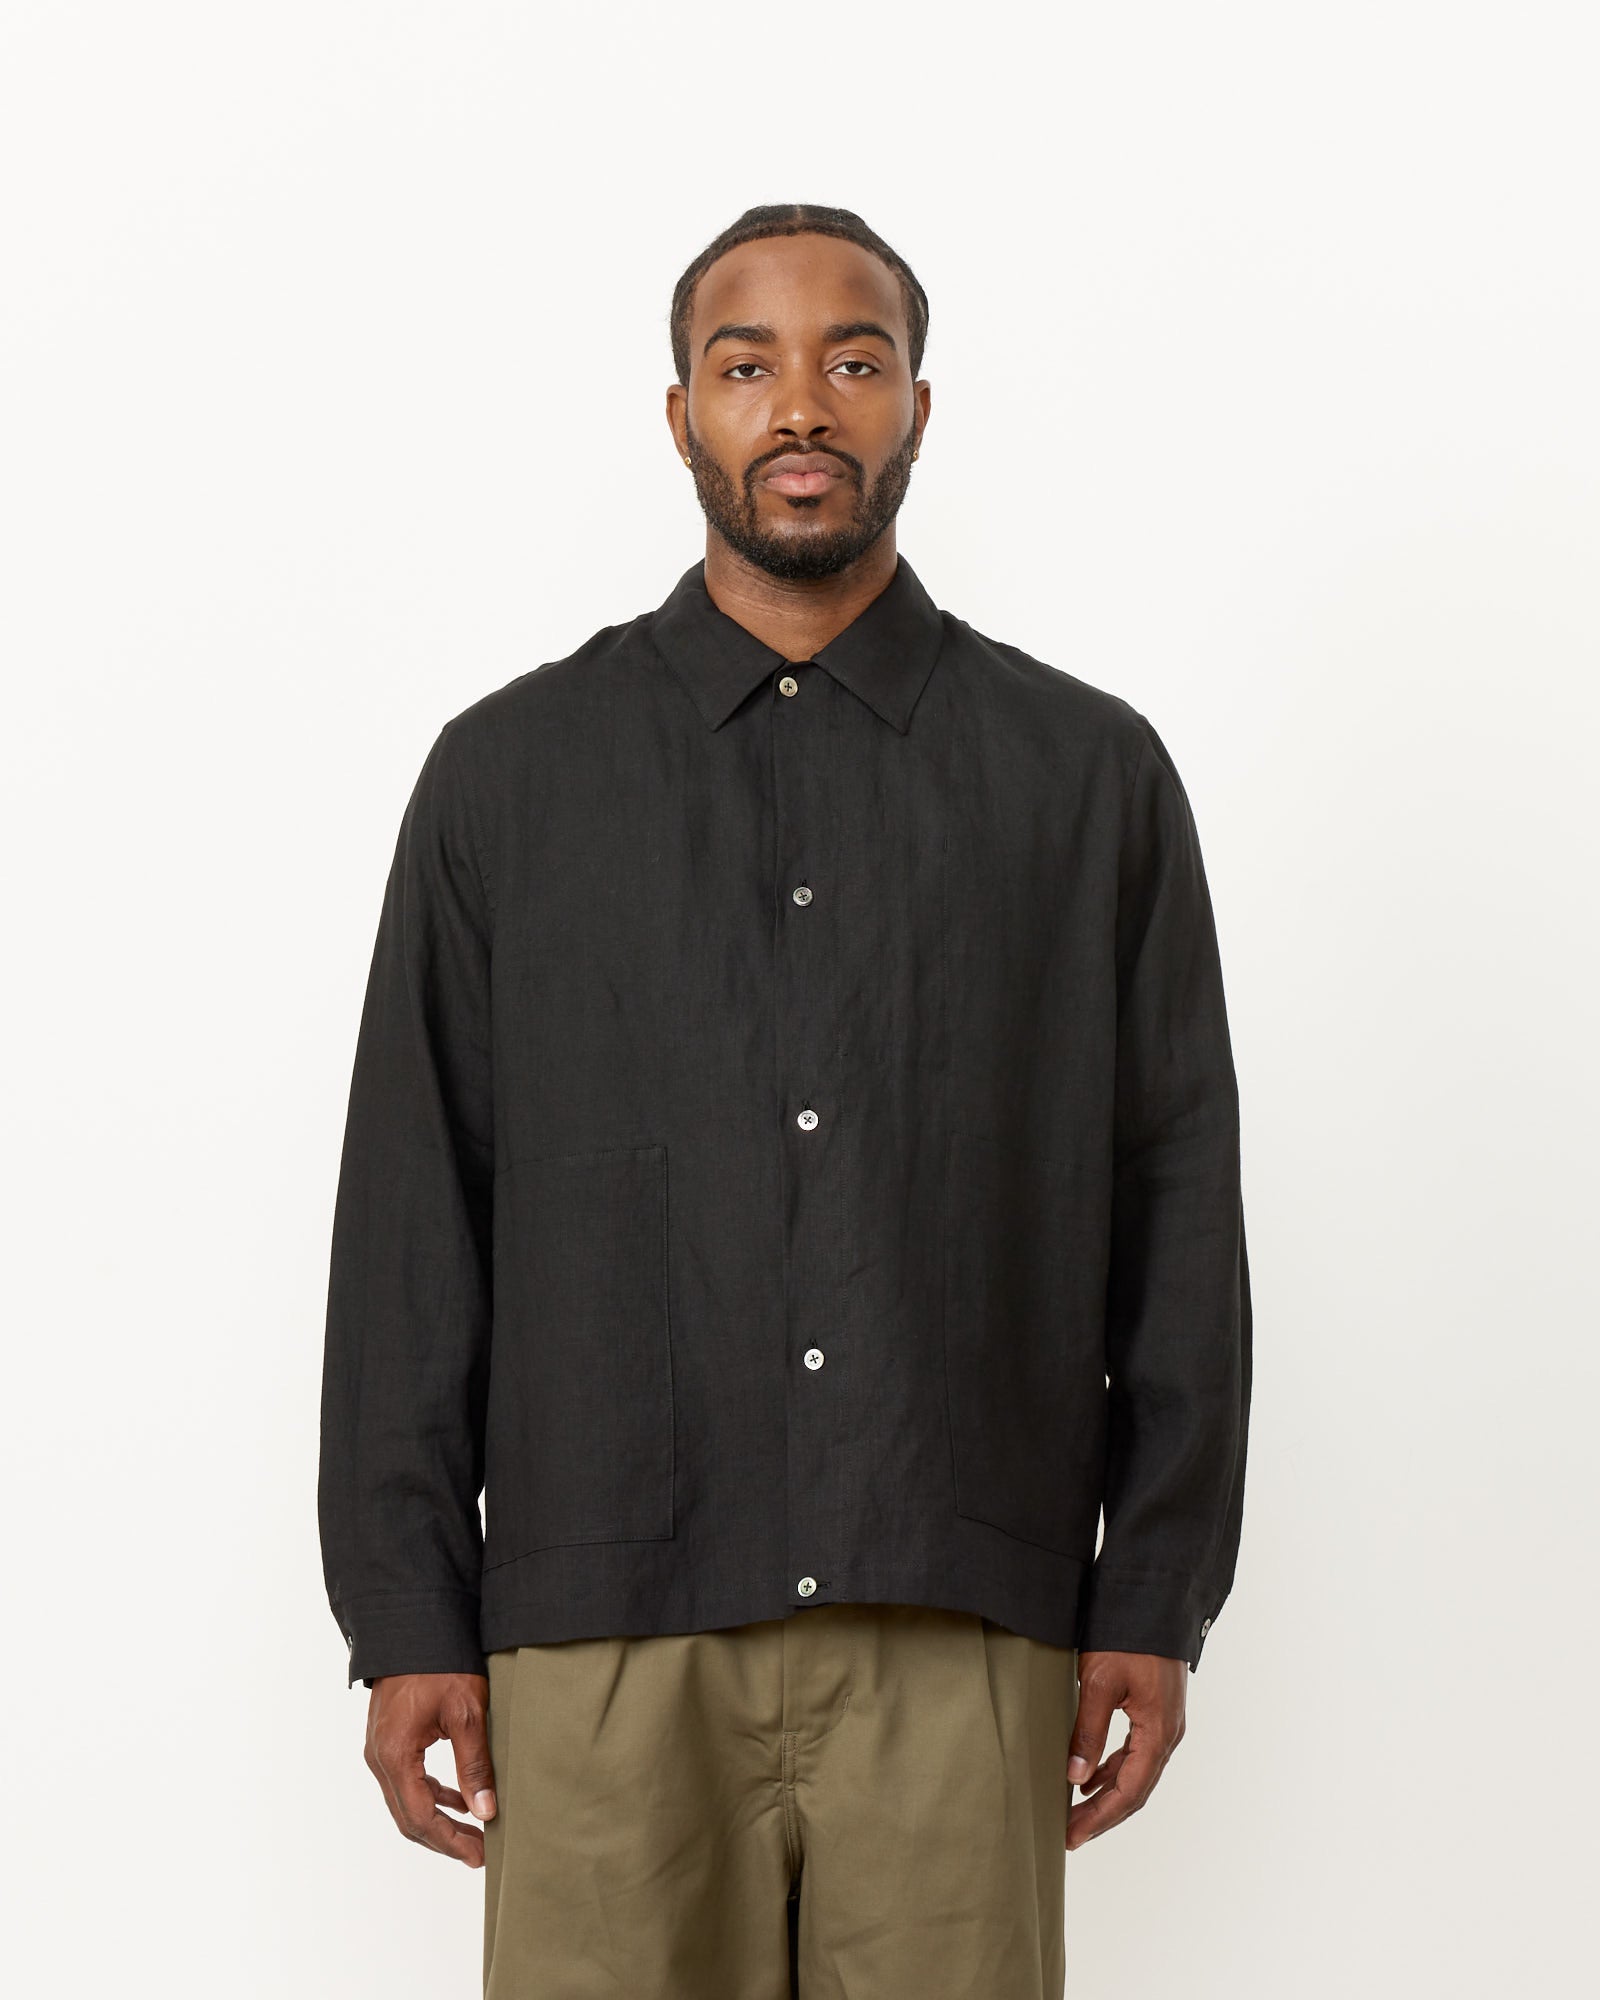 Paper Mixed Shirt Jacket in Black